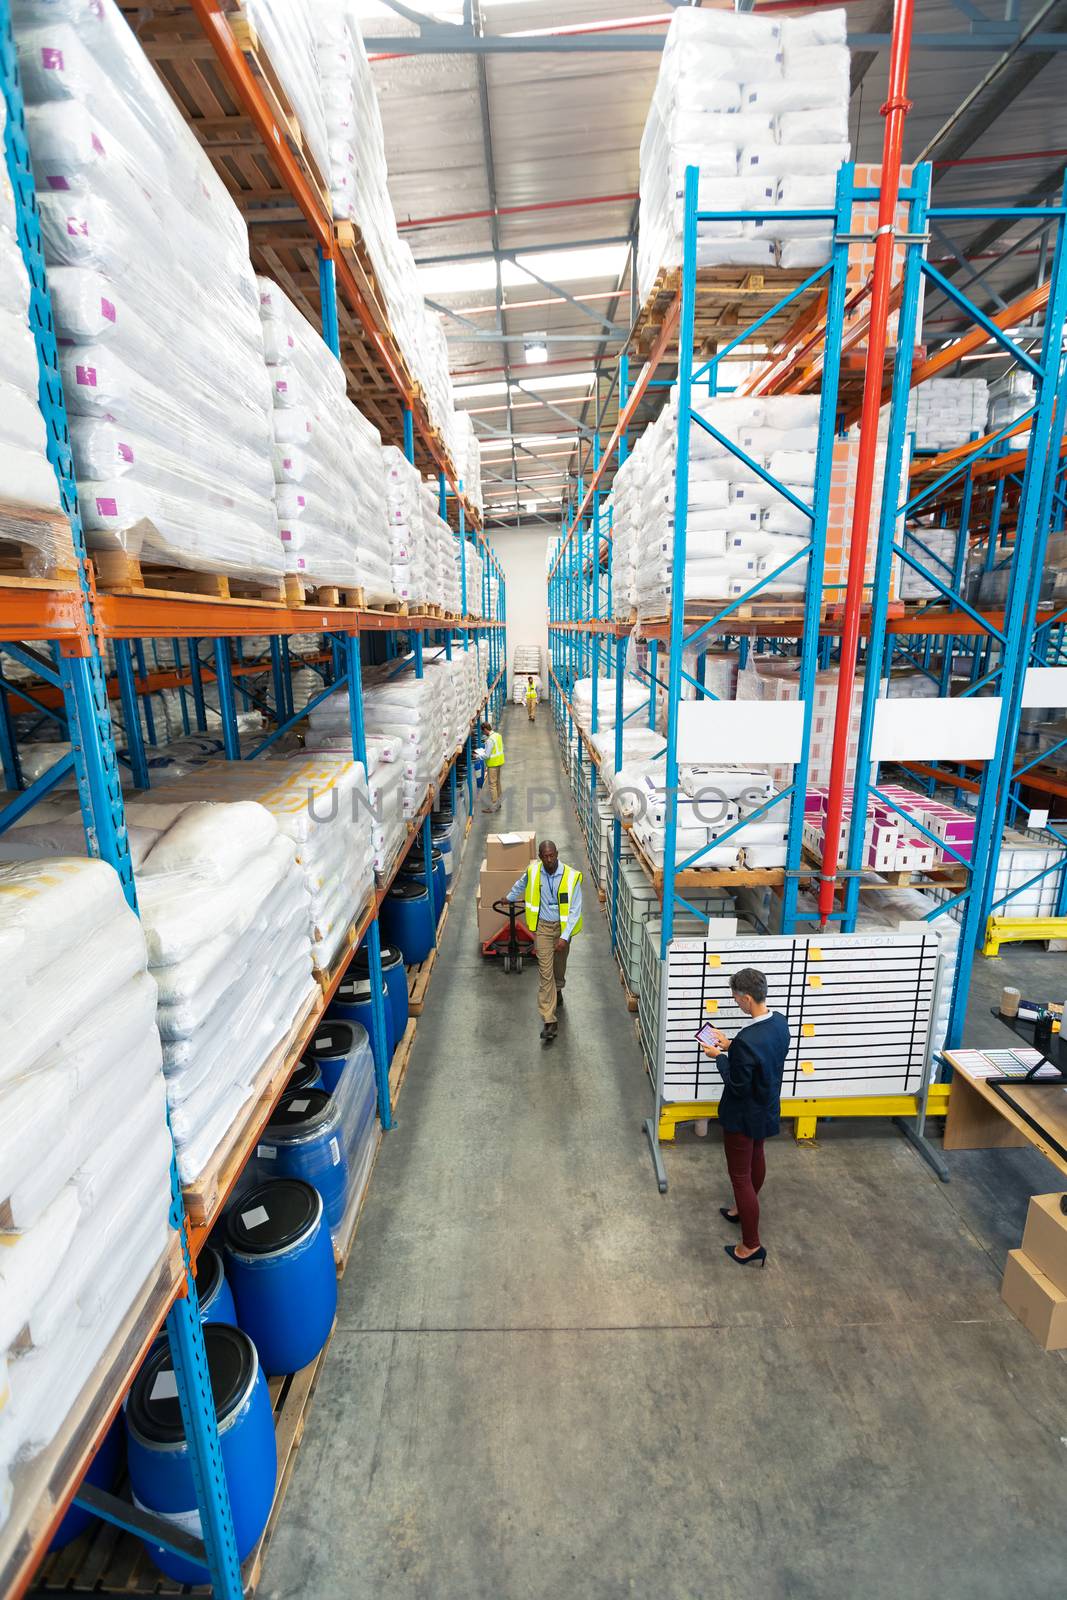 High angle view of mature diverse warehouse staff working together in warehouse. African-american man is pulling cardboard boxes. This is a freight transportation and distribution warehouse. Industrial and industrial workers concept